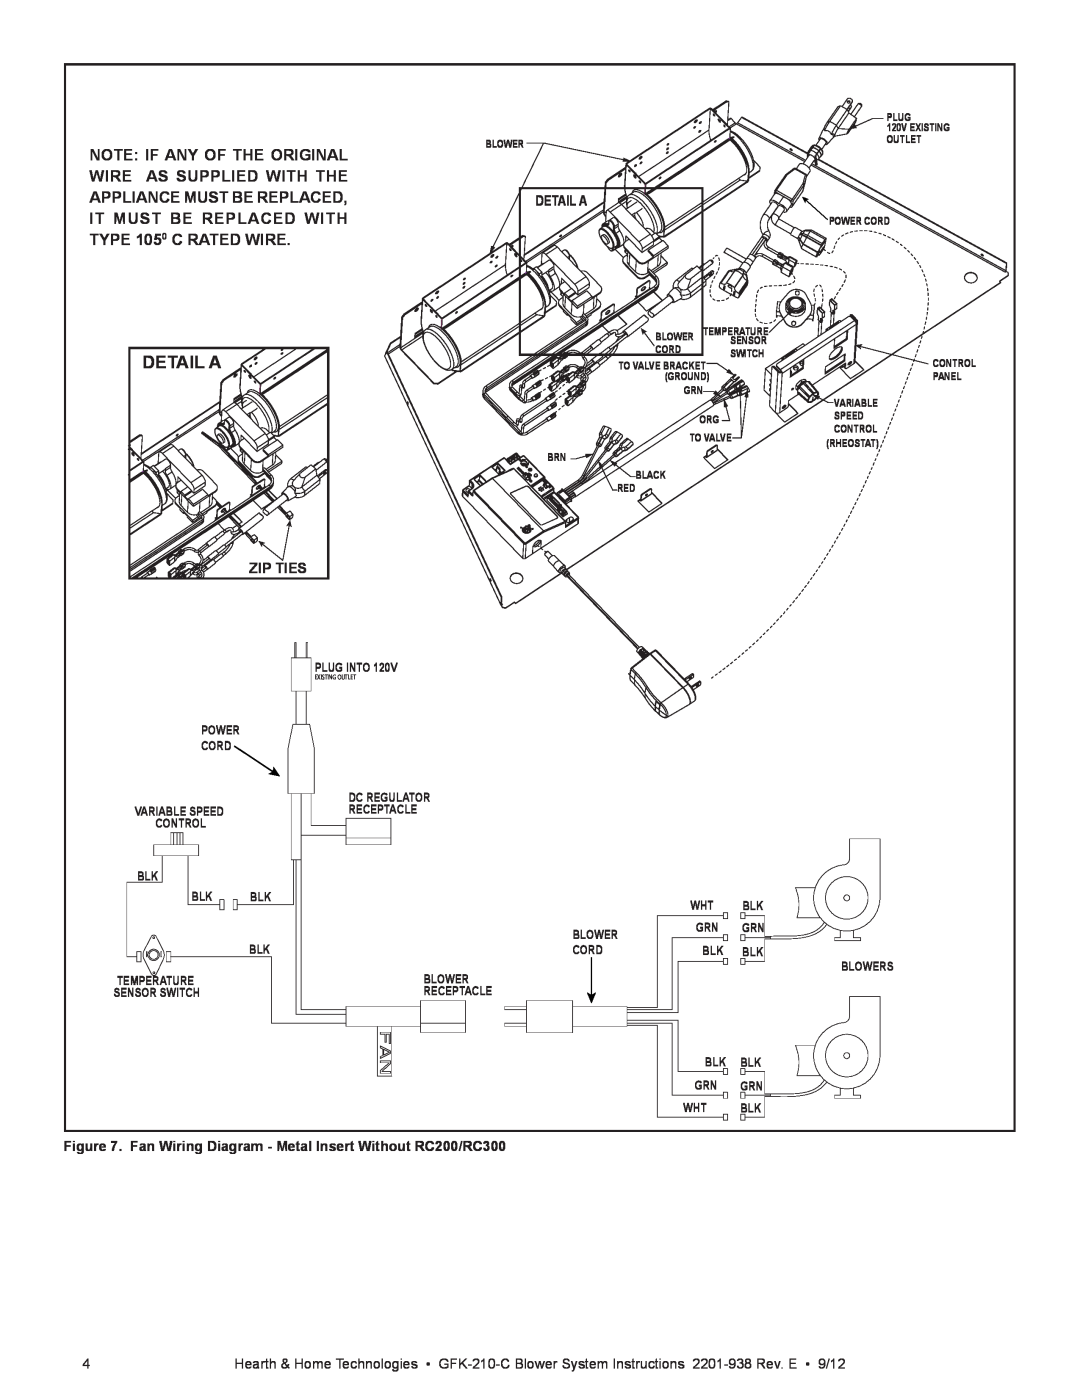 Hearth and Home Technologies GFK-210-C Detail A, Zip Ties, Fan Wiring Diagram - Metal Insert Without RC200/RC300 